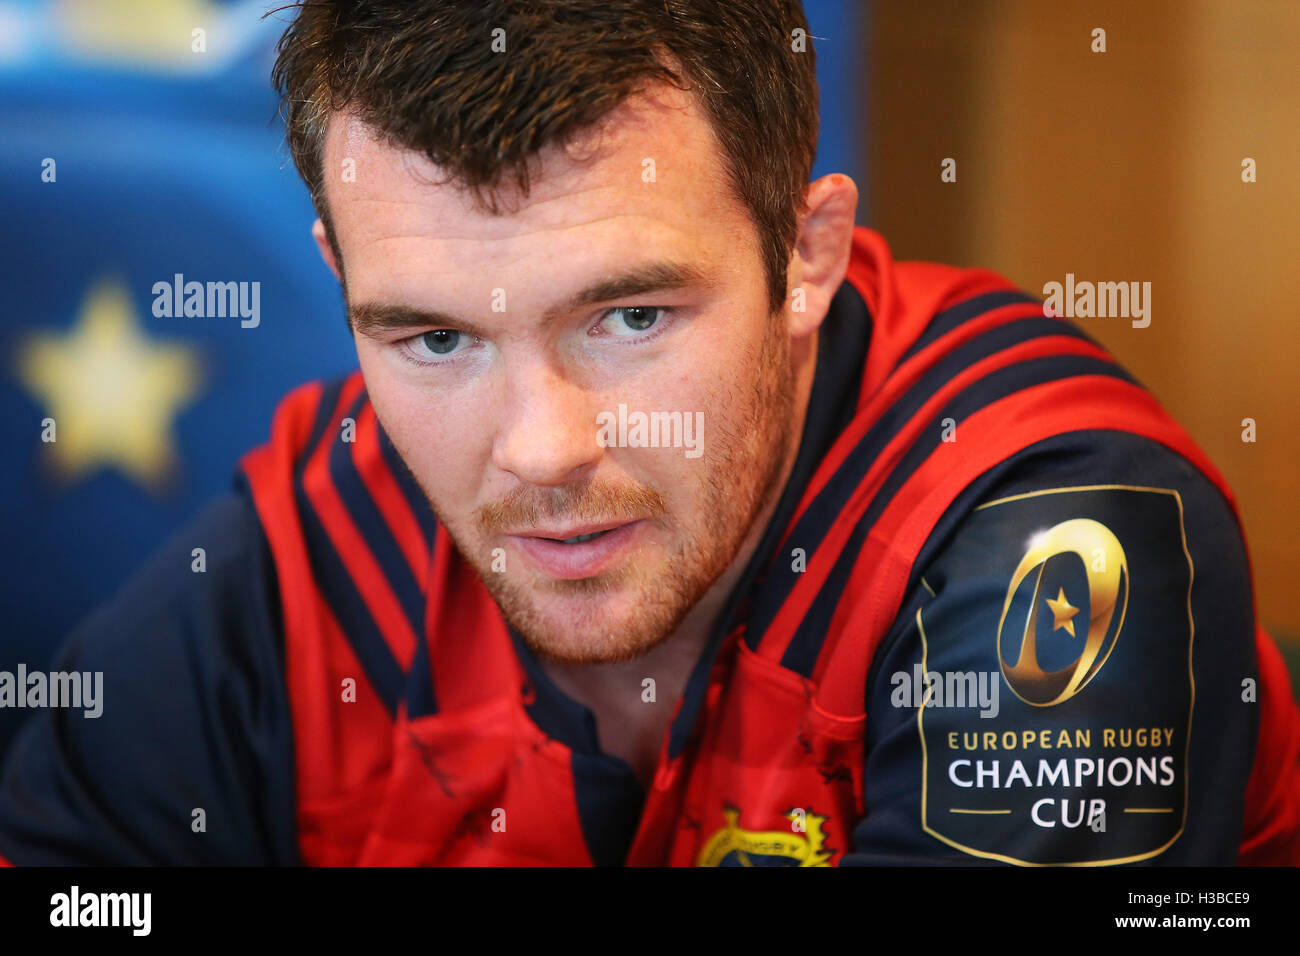 Münsters Peter O'Mahony während der European Rugby Champions Cup/Challenge Cup-Turniere starten Pro 12 Clubs in Dublin Convention Centre, Irland. Stockfoto